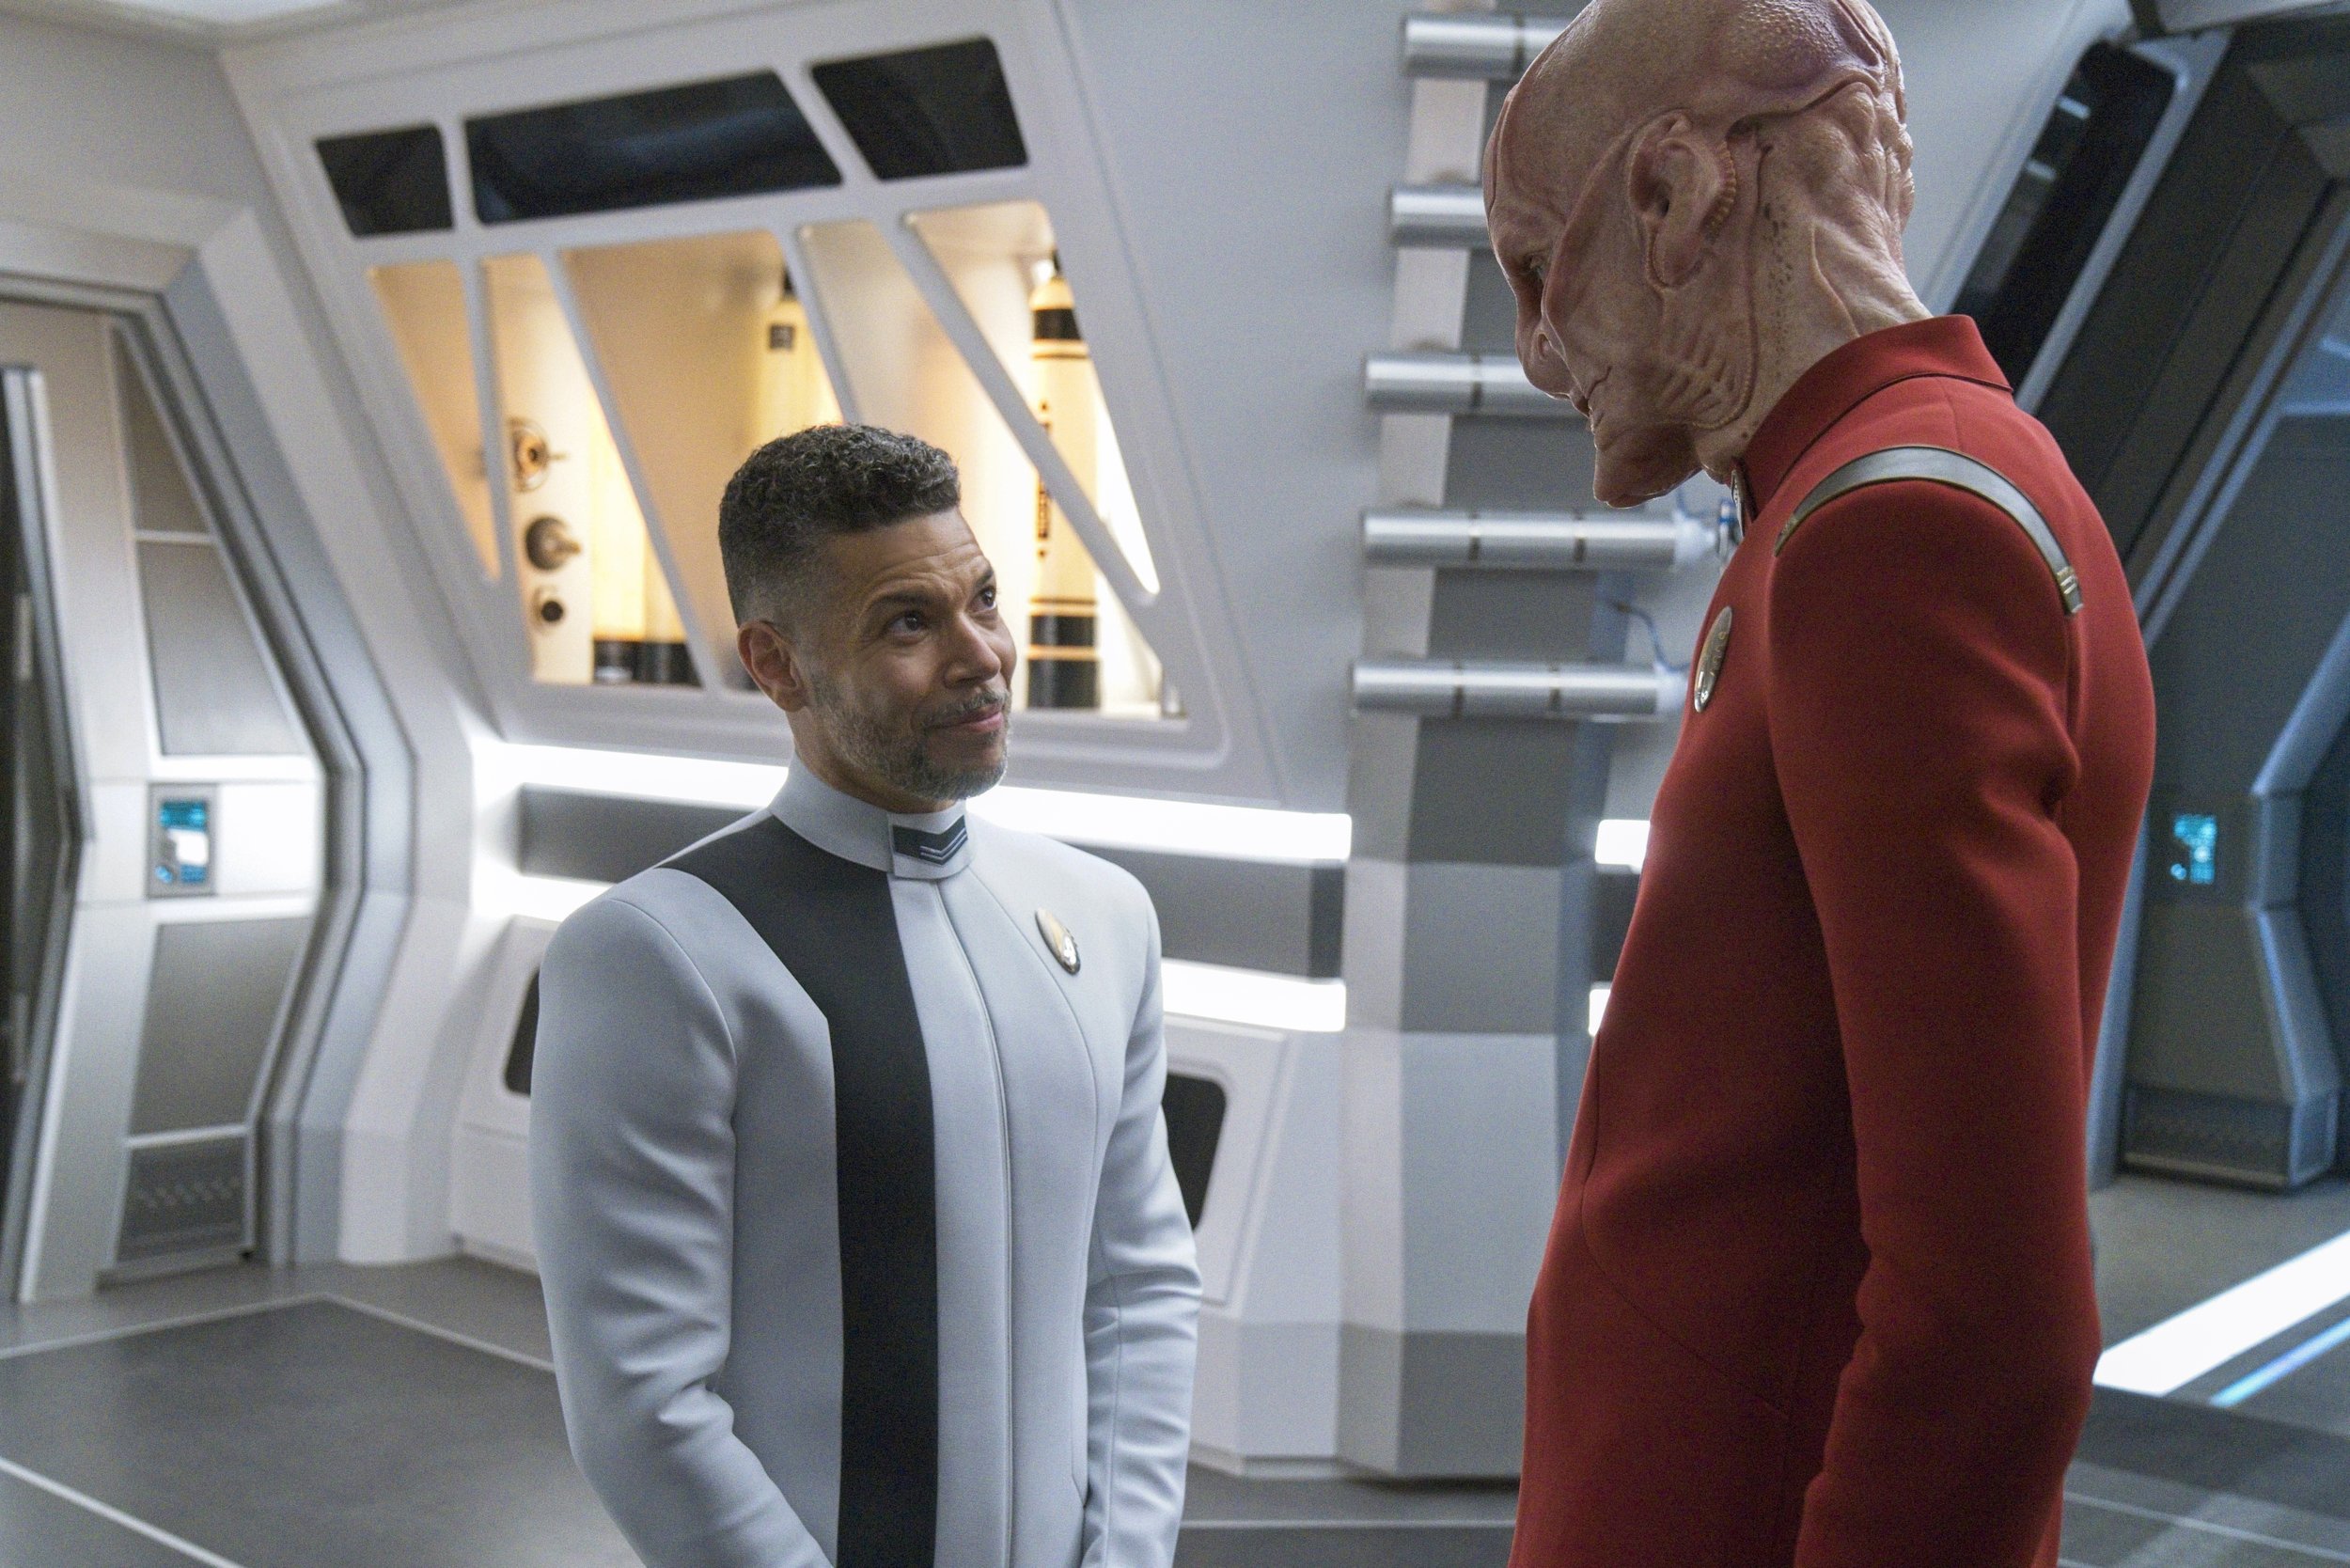   Pictured: Wilson Cruz as Culber and Doug Jones as Saru of the Paramount+ original series STAR TREK: DISCOVERY. Photo Cr: Michael Gibson/Paramount+ (C) 2021 CBS Interactive. All Rights Reserved.  